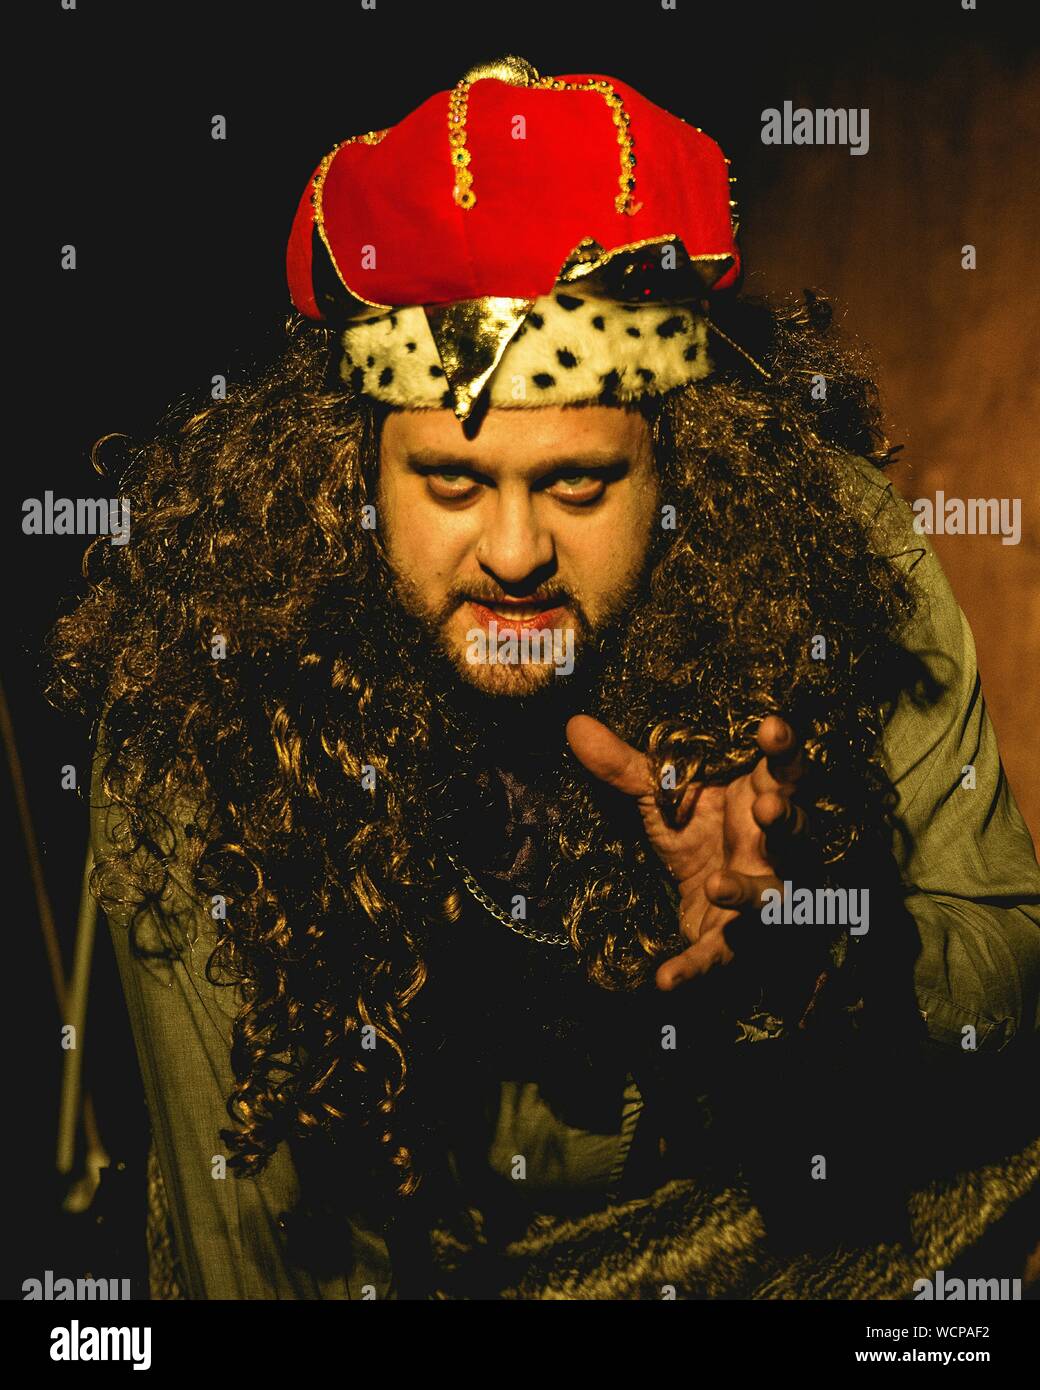 Close-up Of Man Wearing King Costume While Acting On Stage Stock Photo